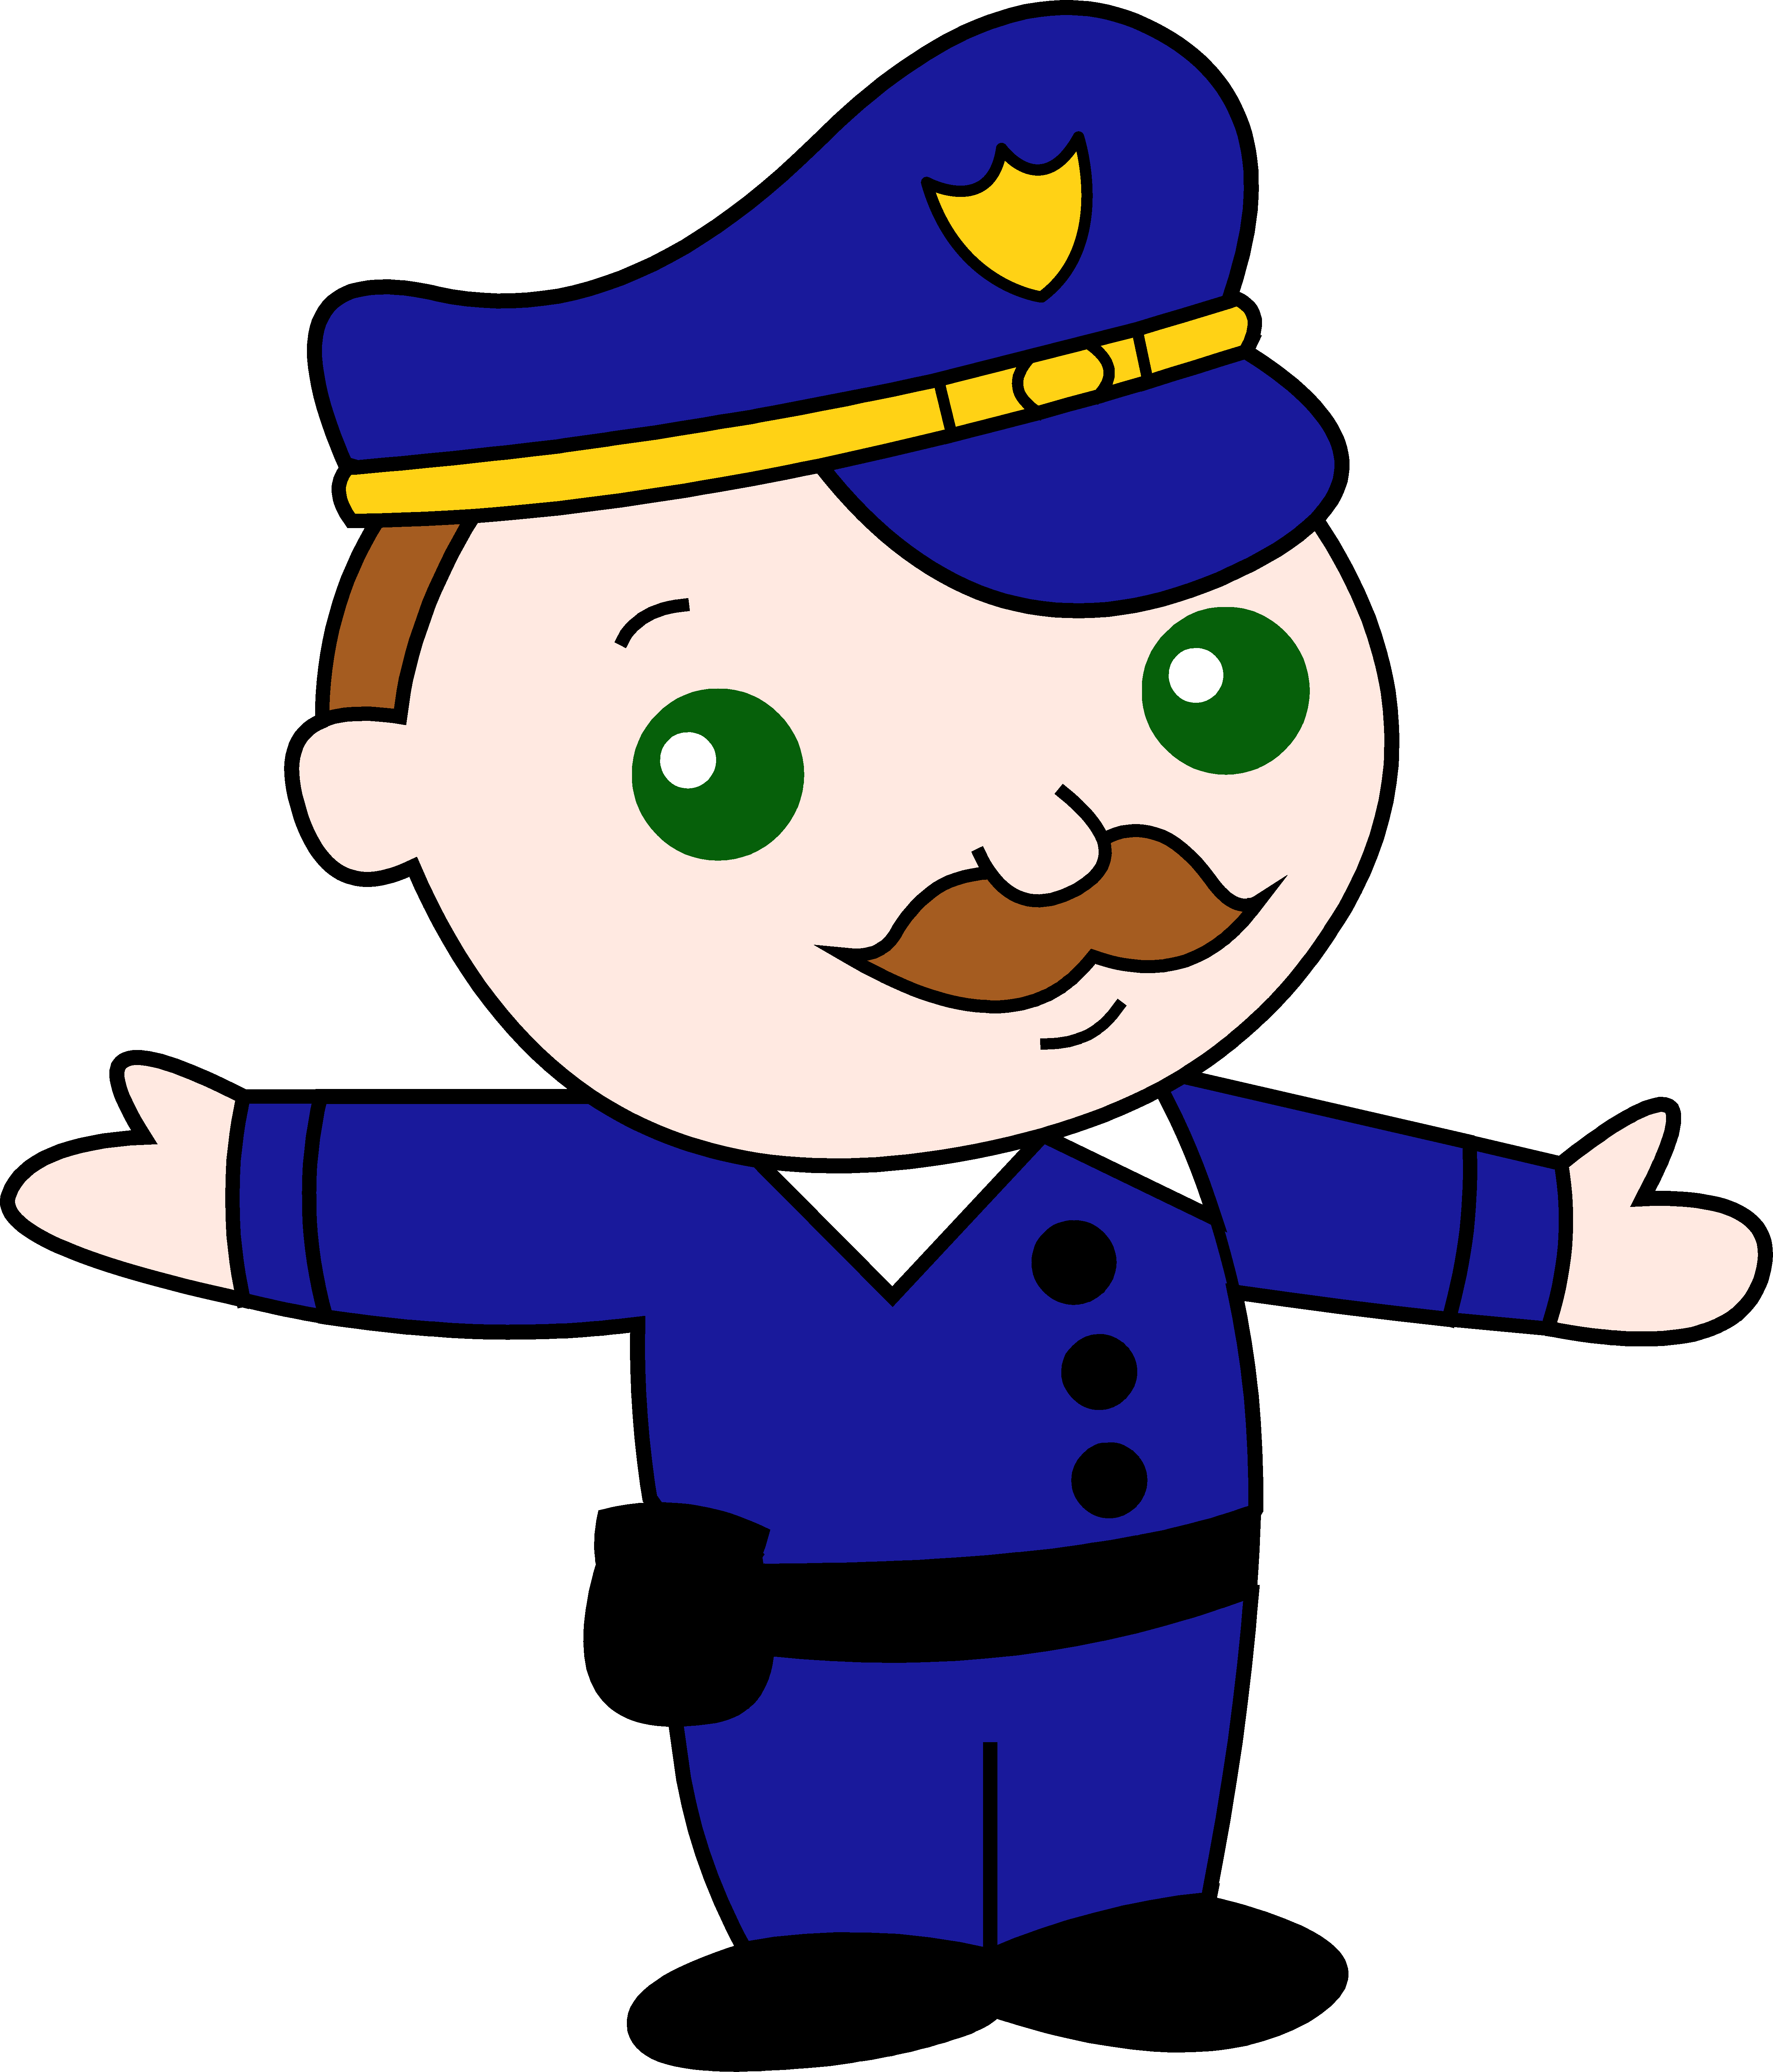 Police Officer Clipart - Free Clipart Images